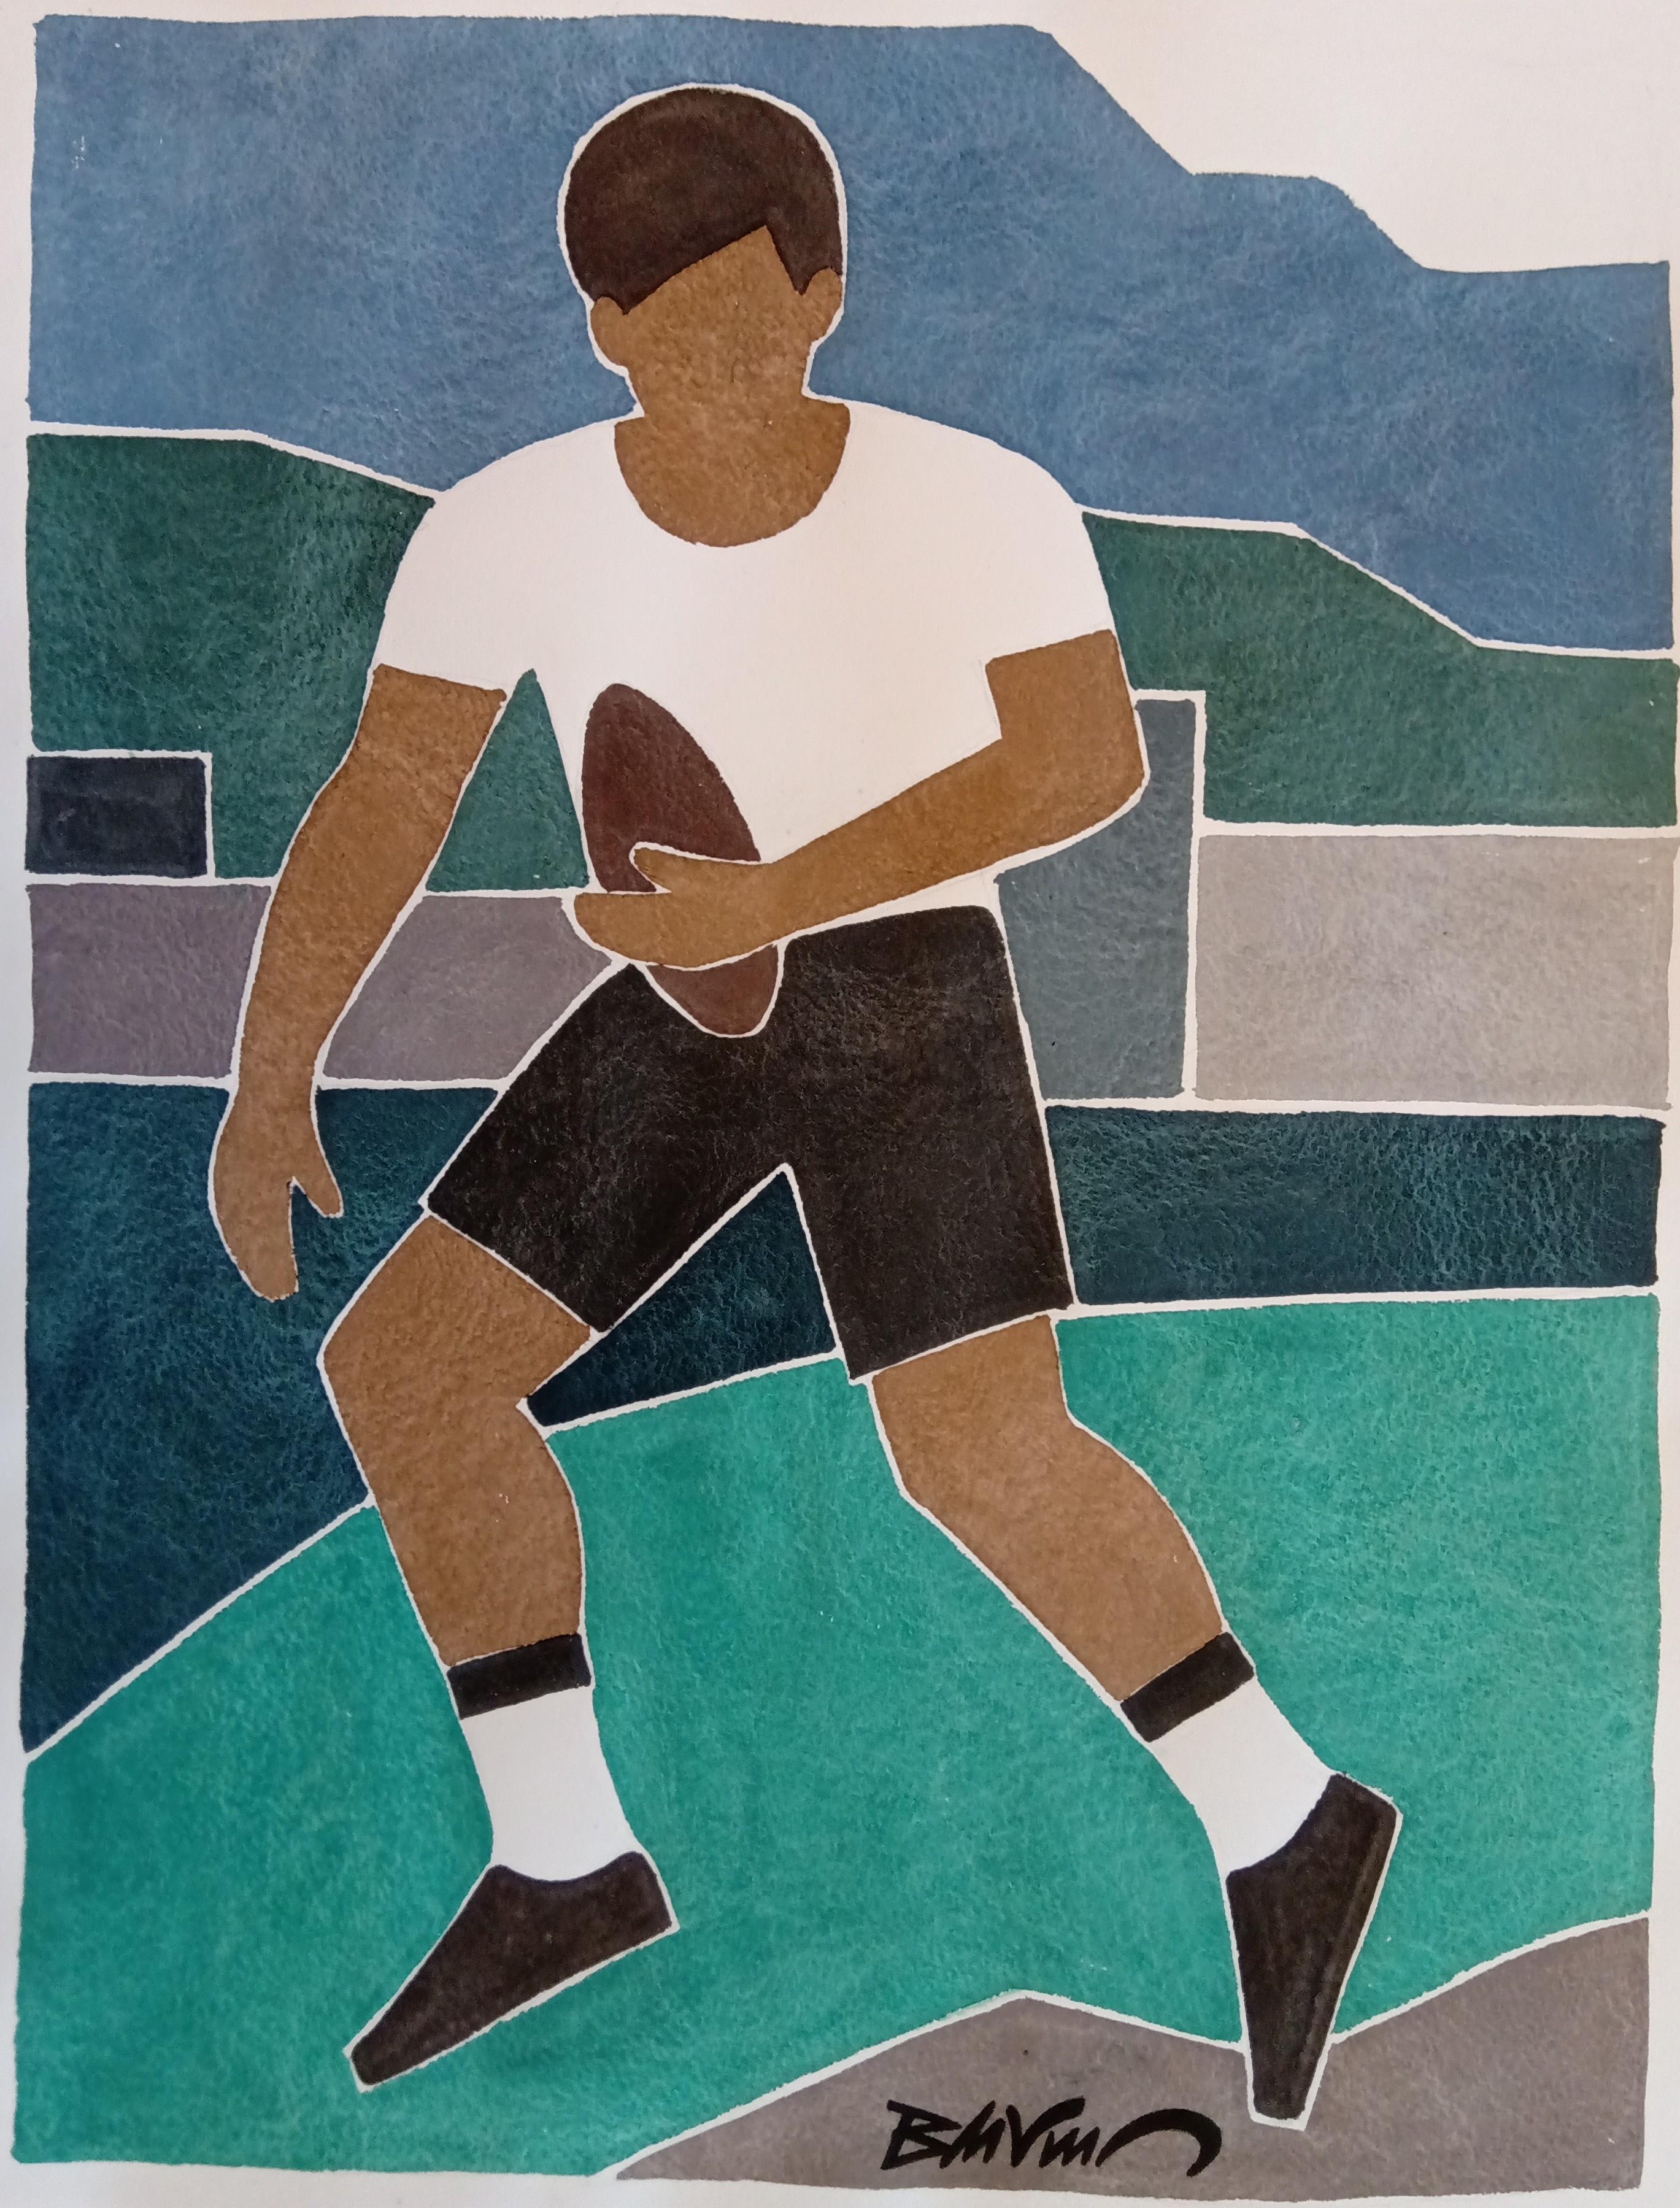 "Rugbyman" figurative drawing, water and china ink 65X50cm - Art by Bertrand de Vismes